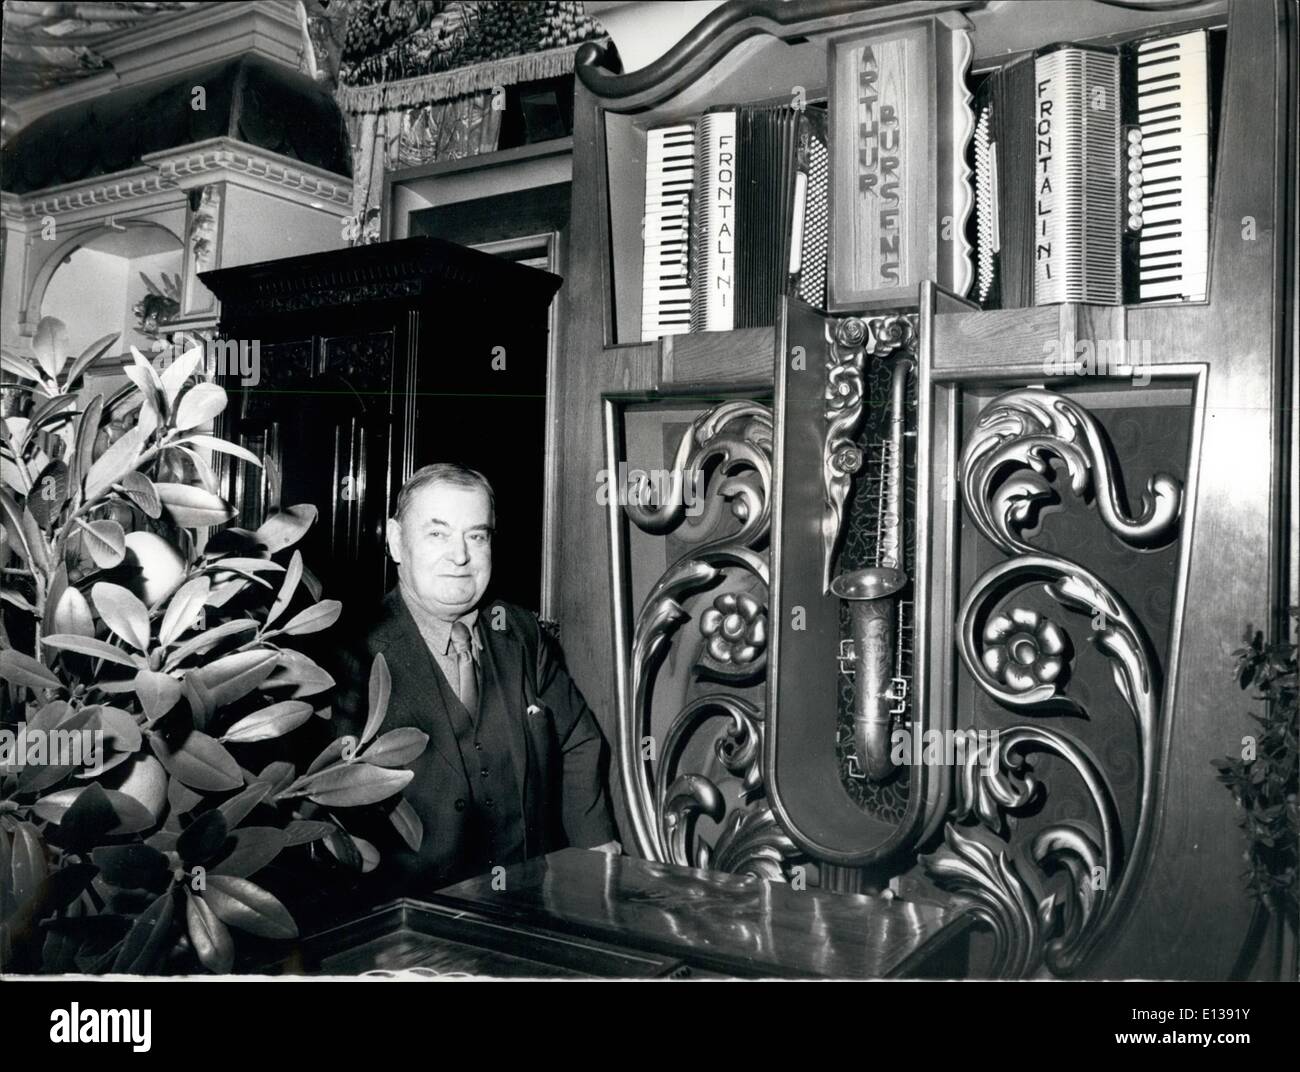 Feb. 29, 2012 - Charles proudly poses with his Arthur Bursen, dance orchestral organ of the early 1930's, from Belgium. Stock Photo